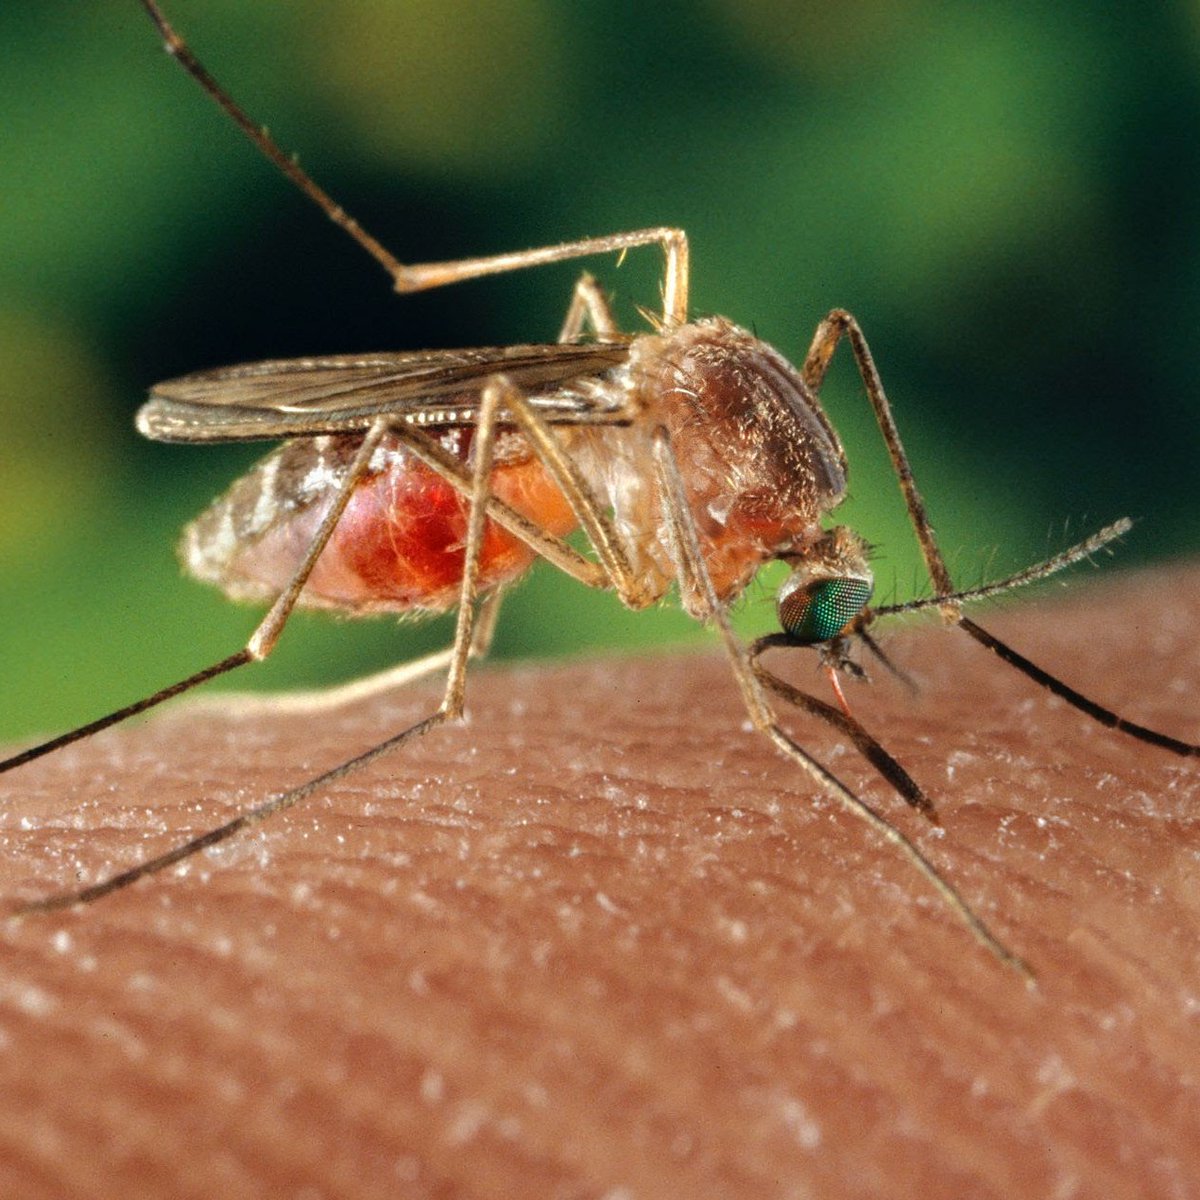 The latest IMJ On-Air podcast on Victoria’s JEV cluster is now live – bit.ly/3O2PsOF A/Prof Ian Woolley discuss the Japanese encephalitis virus with Dr Justin Jackson, Dr Sam Thorburn, Dr Paul Kinsella and A/Prof Deborah Friedman. @marrow @TheRACP @ianwool08925090